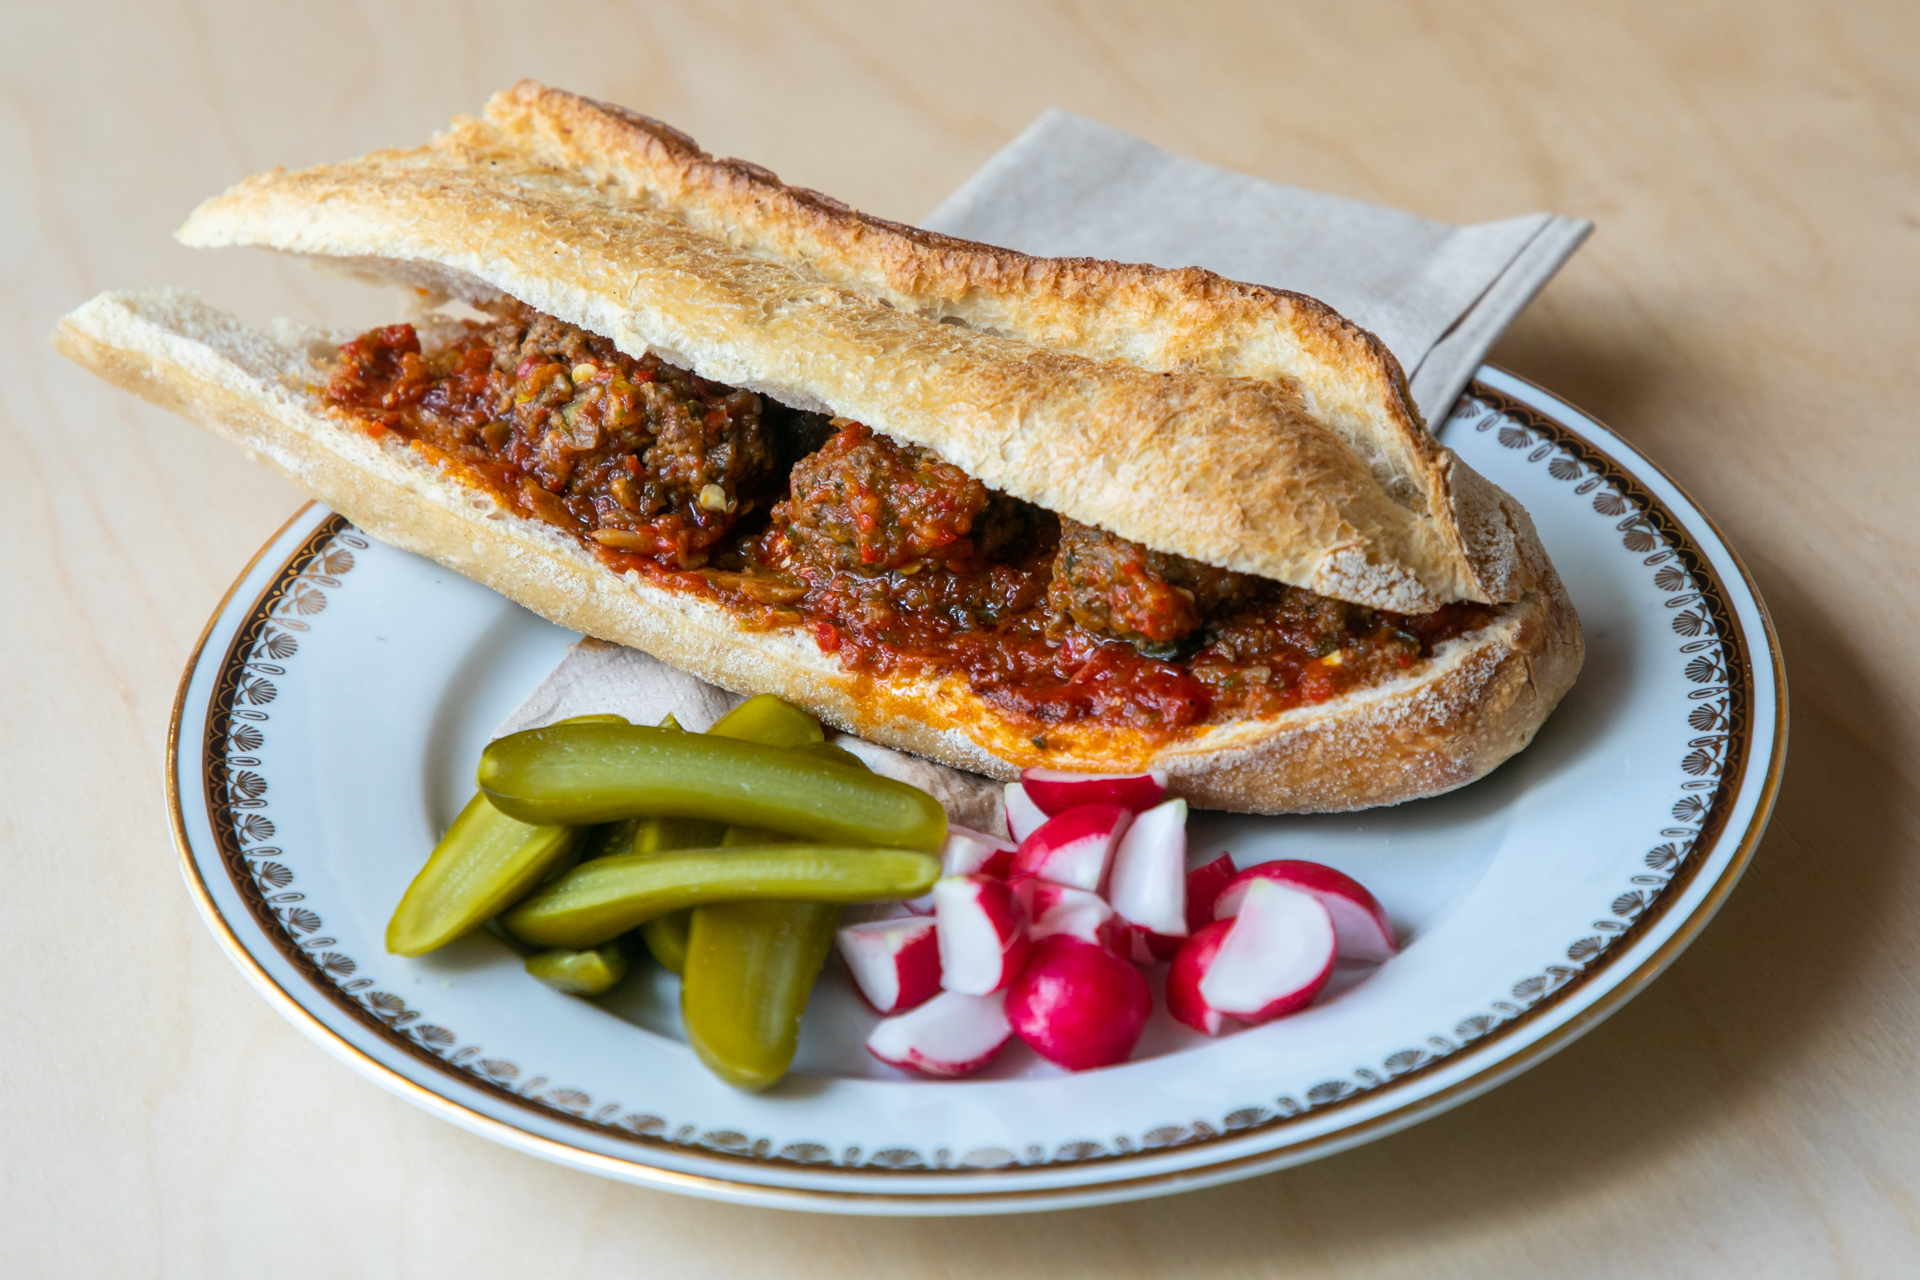 Baguette sandwich with meatballs alongside radishes and pickles